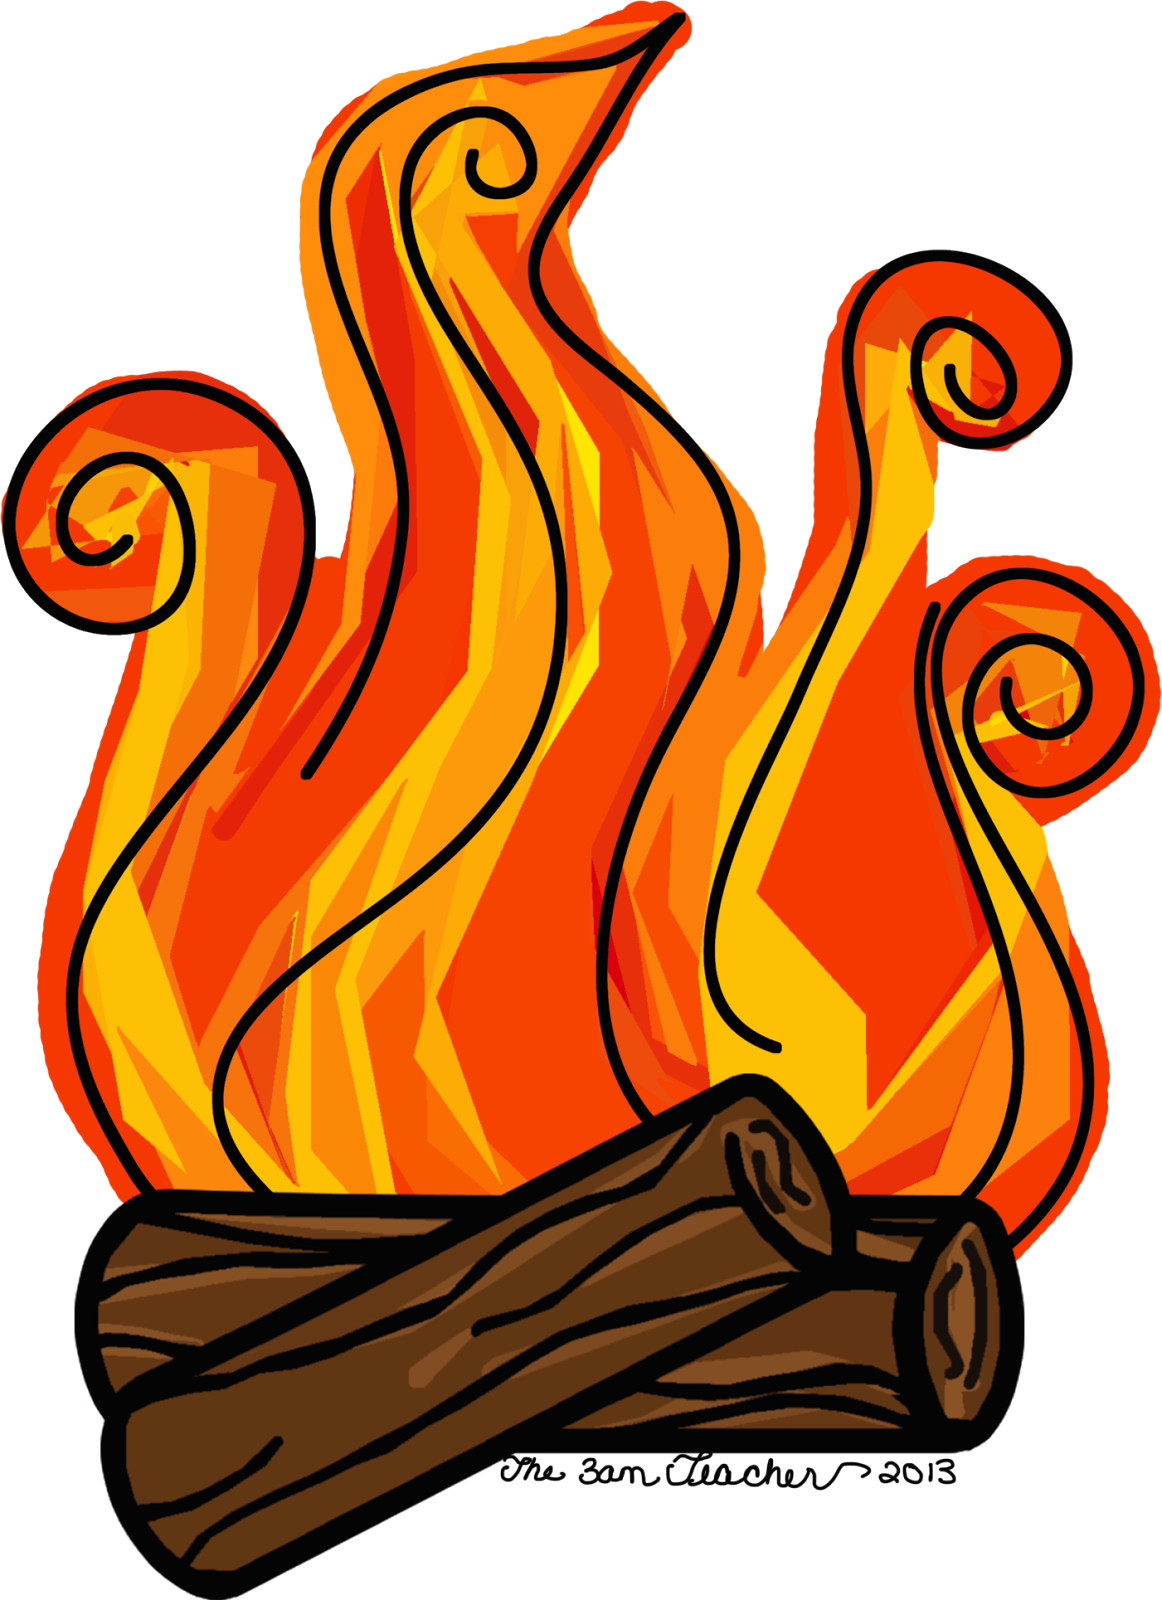 Free On My Blog Or Fb Fan Page, But You Can Get This - Fireplace Clip Art (1162x1600)